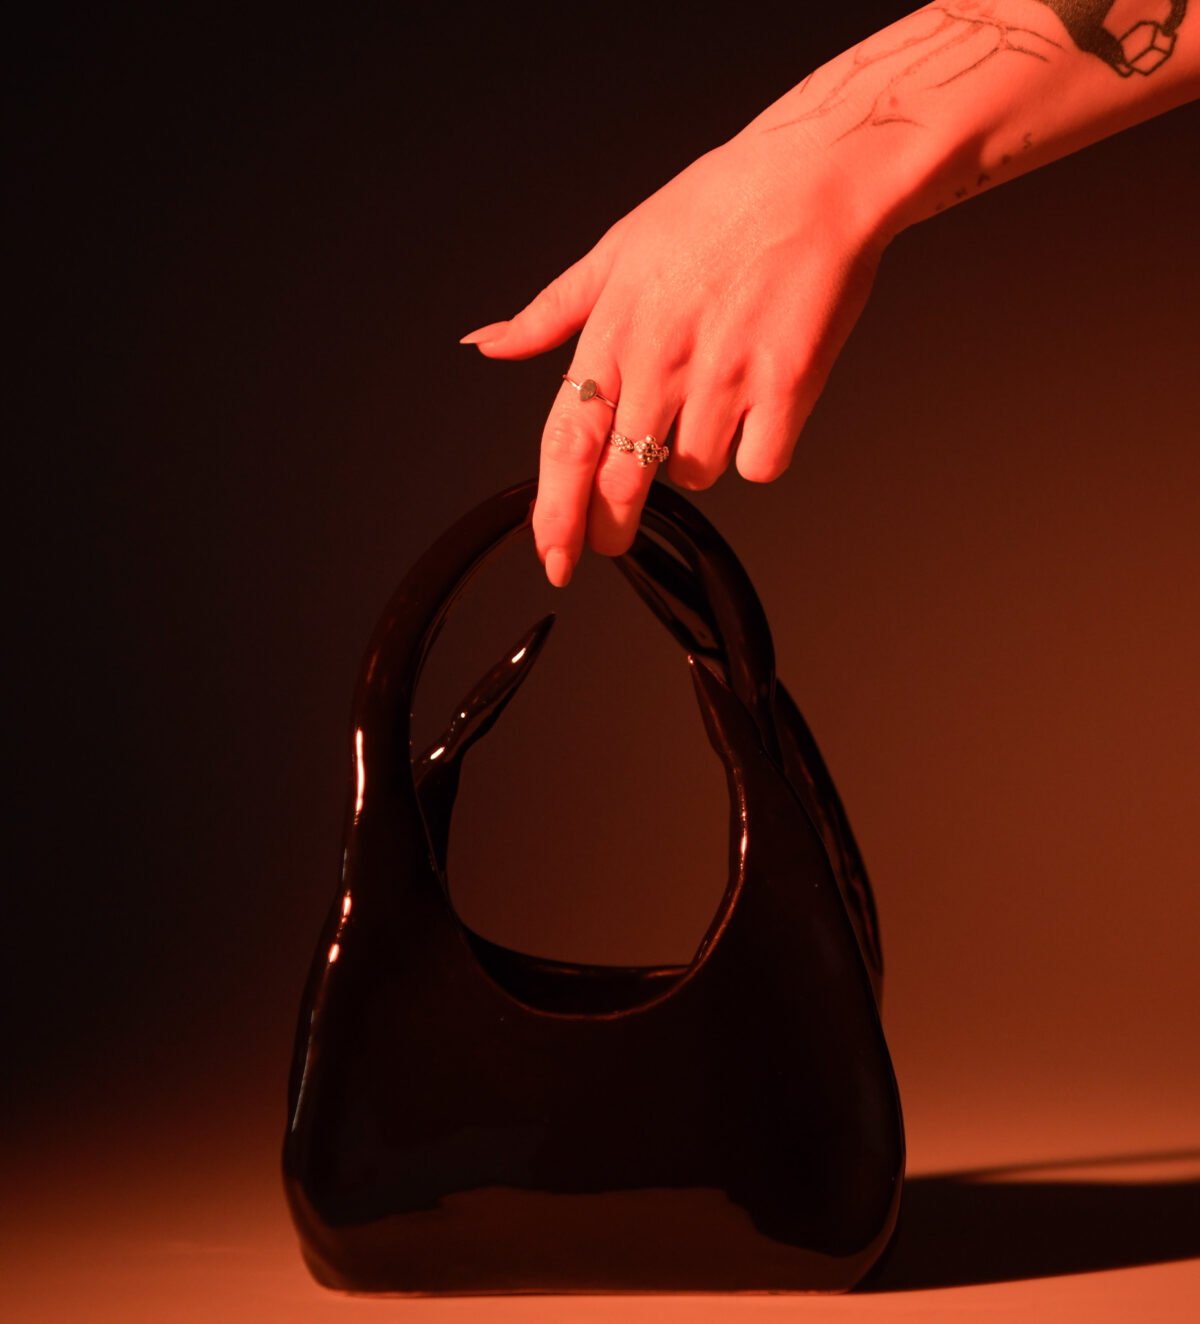 Black glazed ceramic handbag, with a hand grazing the handle to communicate scale